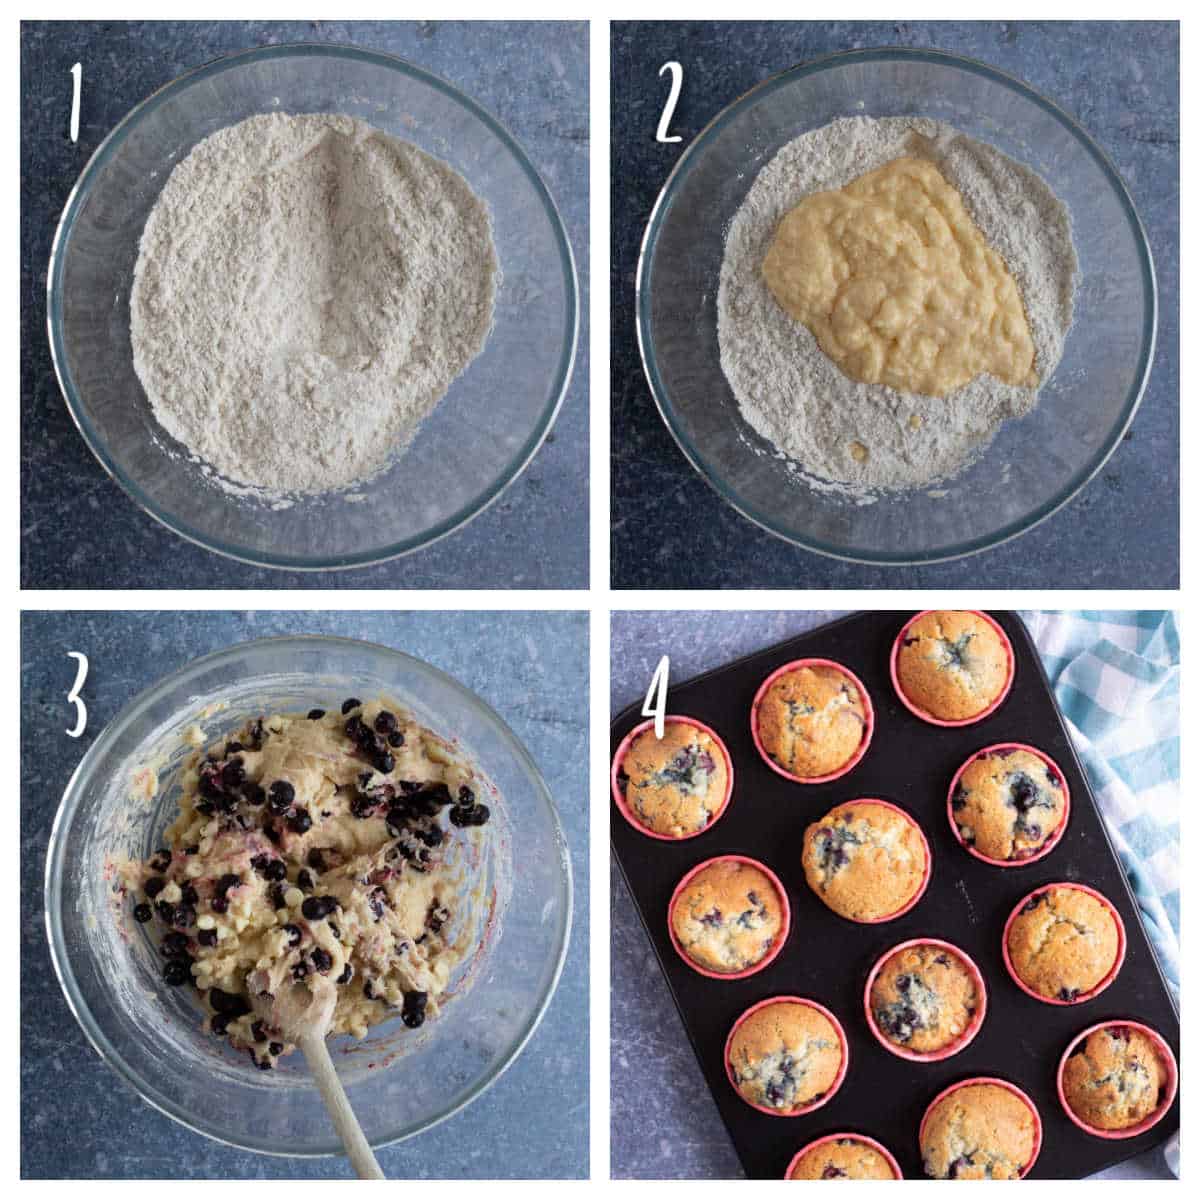 Step by step photo instructions for making blackcurrant muffins.